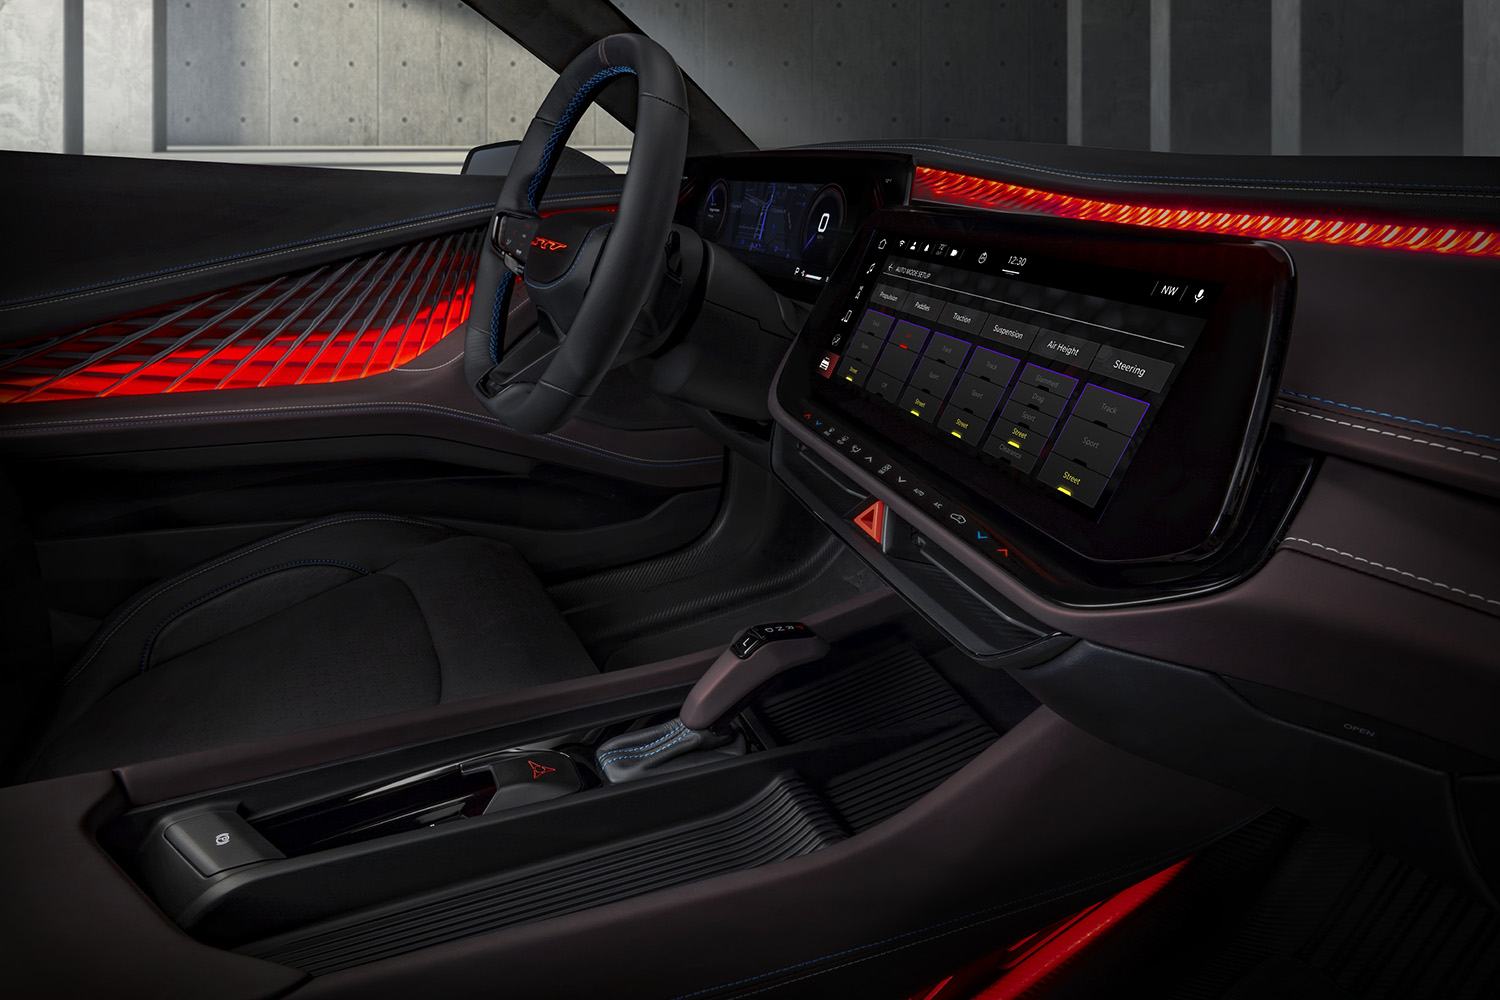 The Dodge Charger Daytona SRT Concept’s ambient Attitude Adjustment Lighting™ illuminates the interior’s parametric texture from below, playing with depth and dimension.